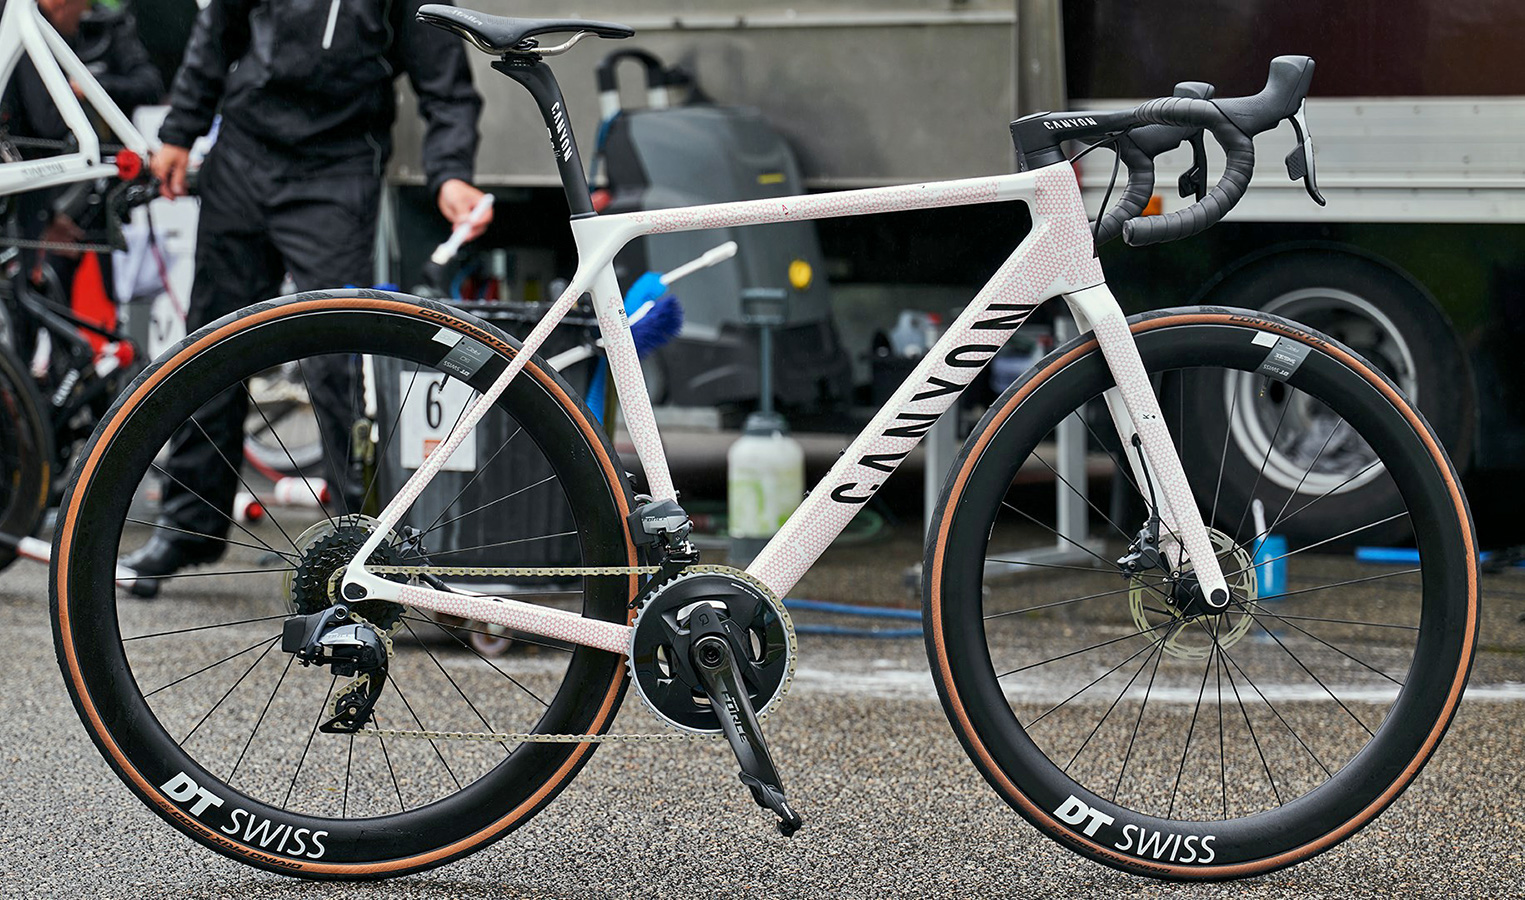 Canyon Ultimate CF SLX 8 Disc TDF limited edition carbon road bike, photo by Tino Pohlman, 108th Tour de France